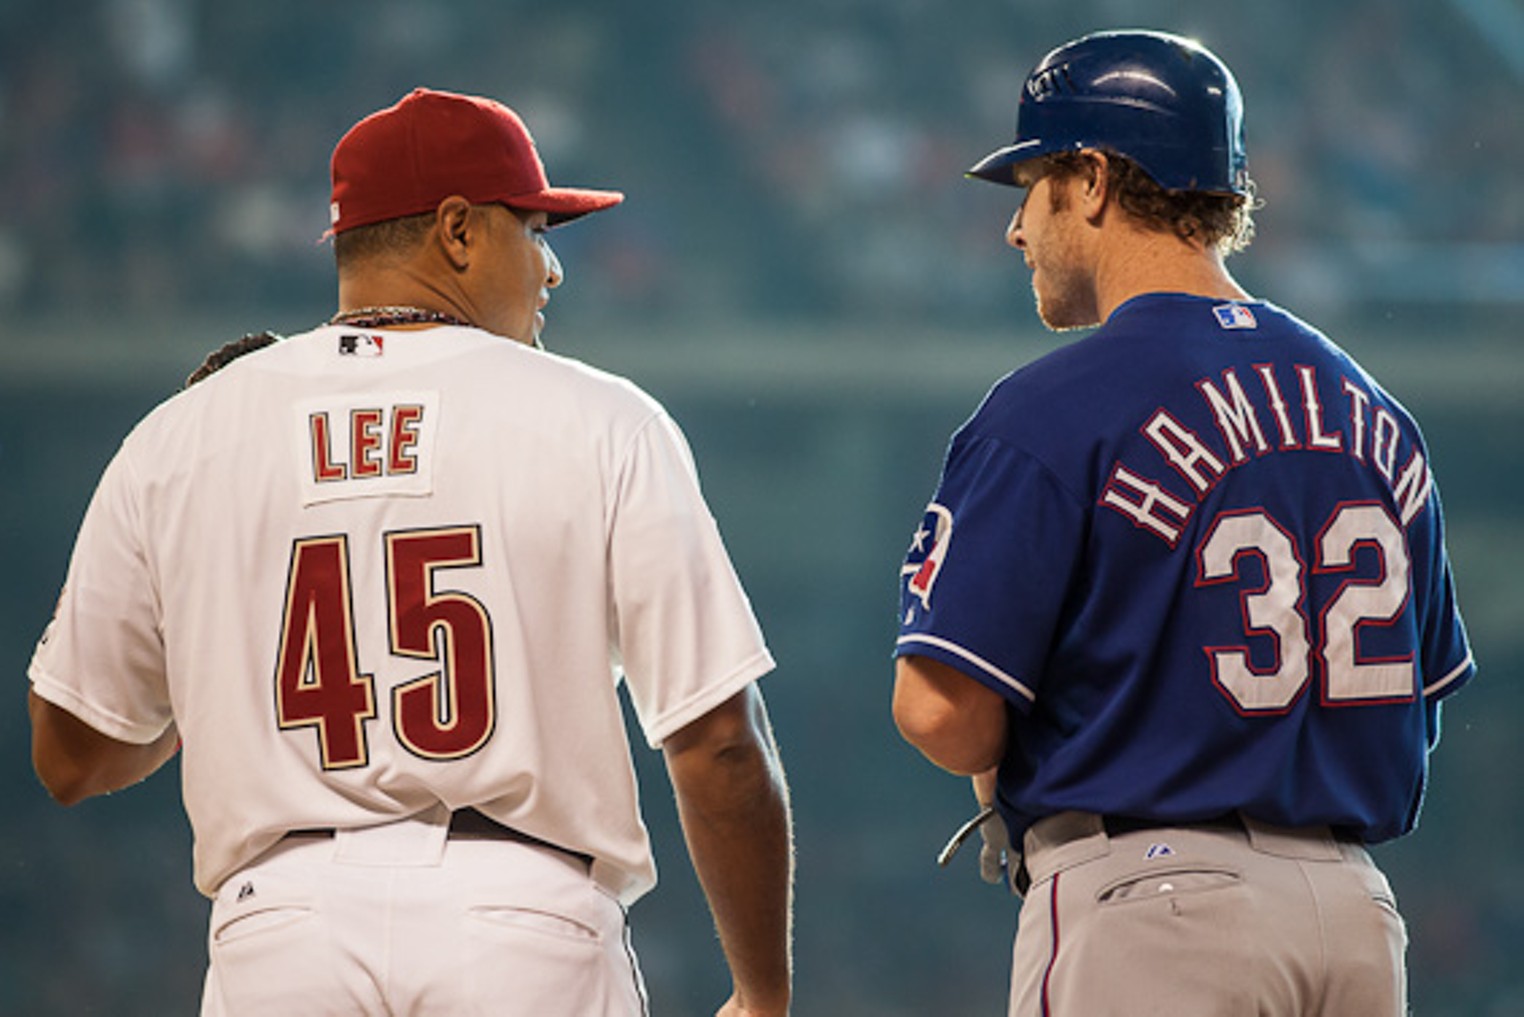 Photos: Rangers hand over the Silver Boot with loss to Astros